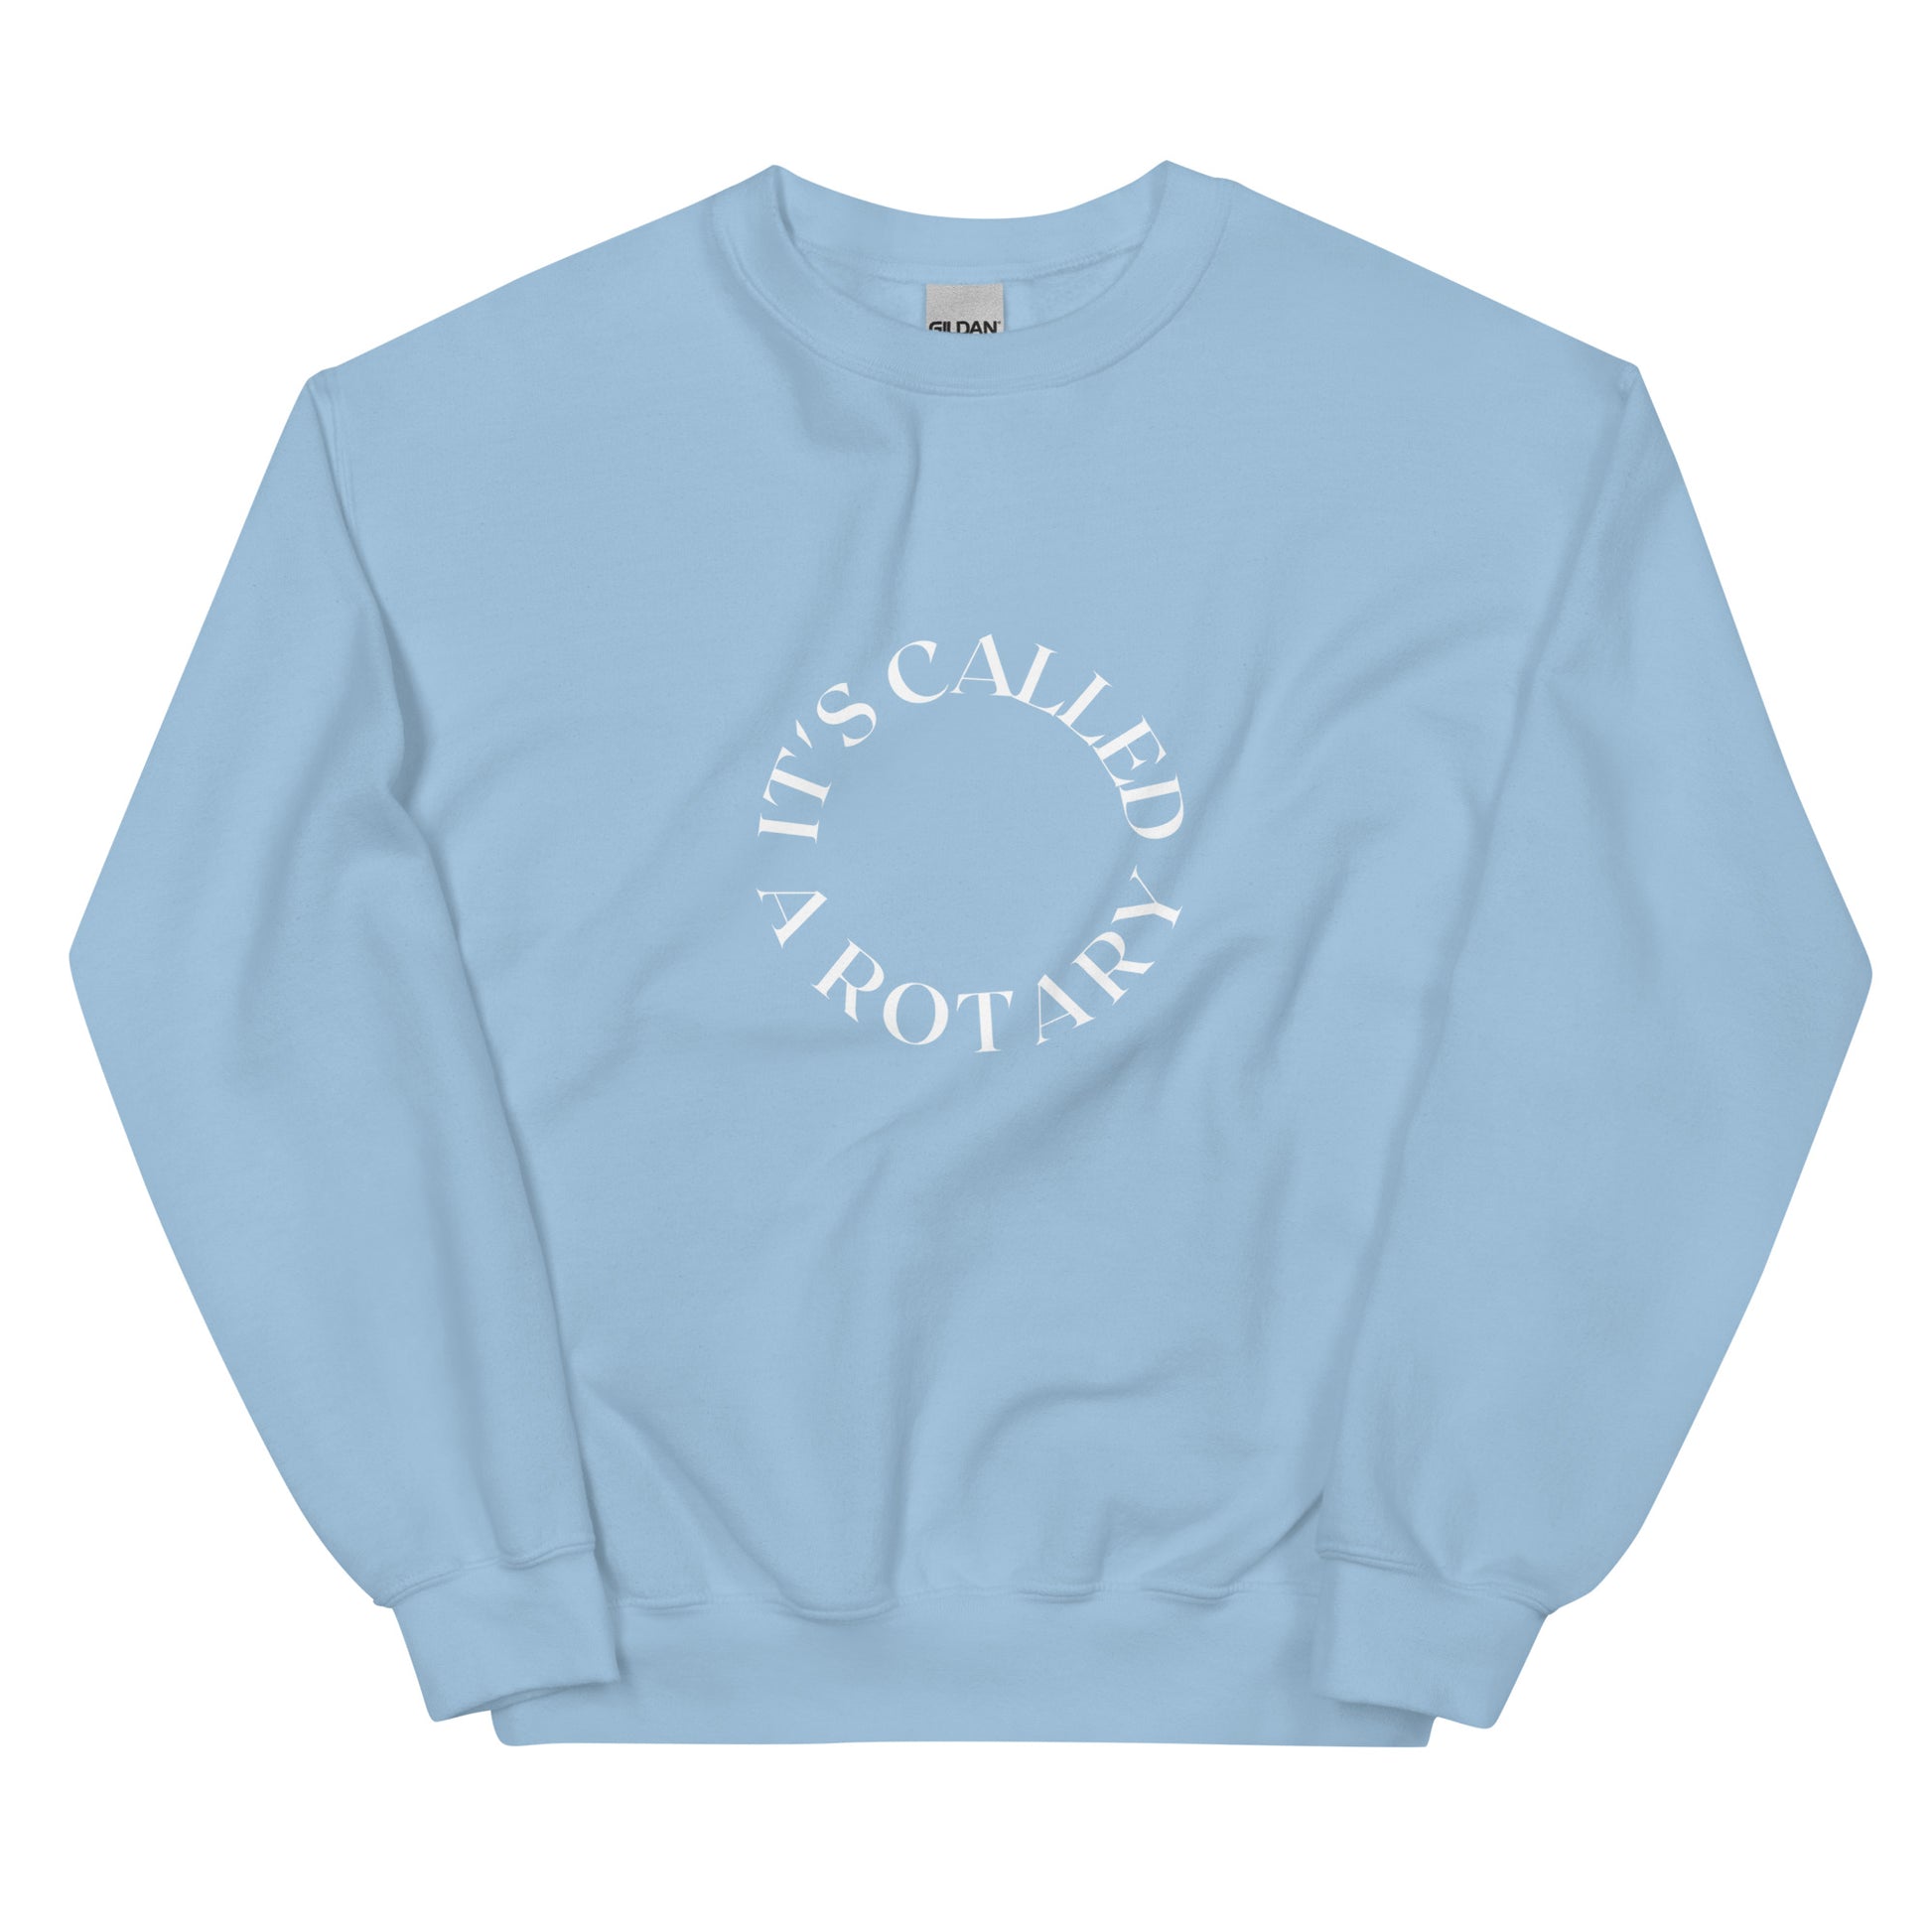 light blue crewneck that says "it's called a rotary" in white lettering shaped in a circle